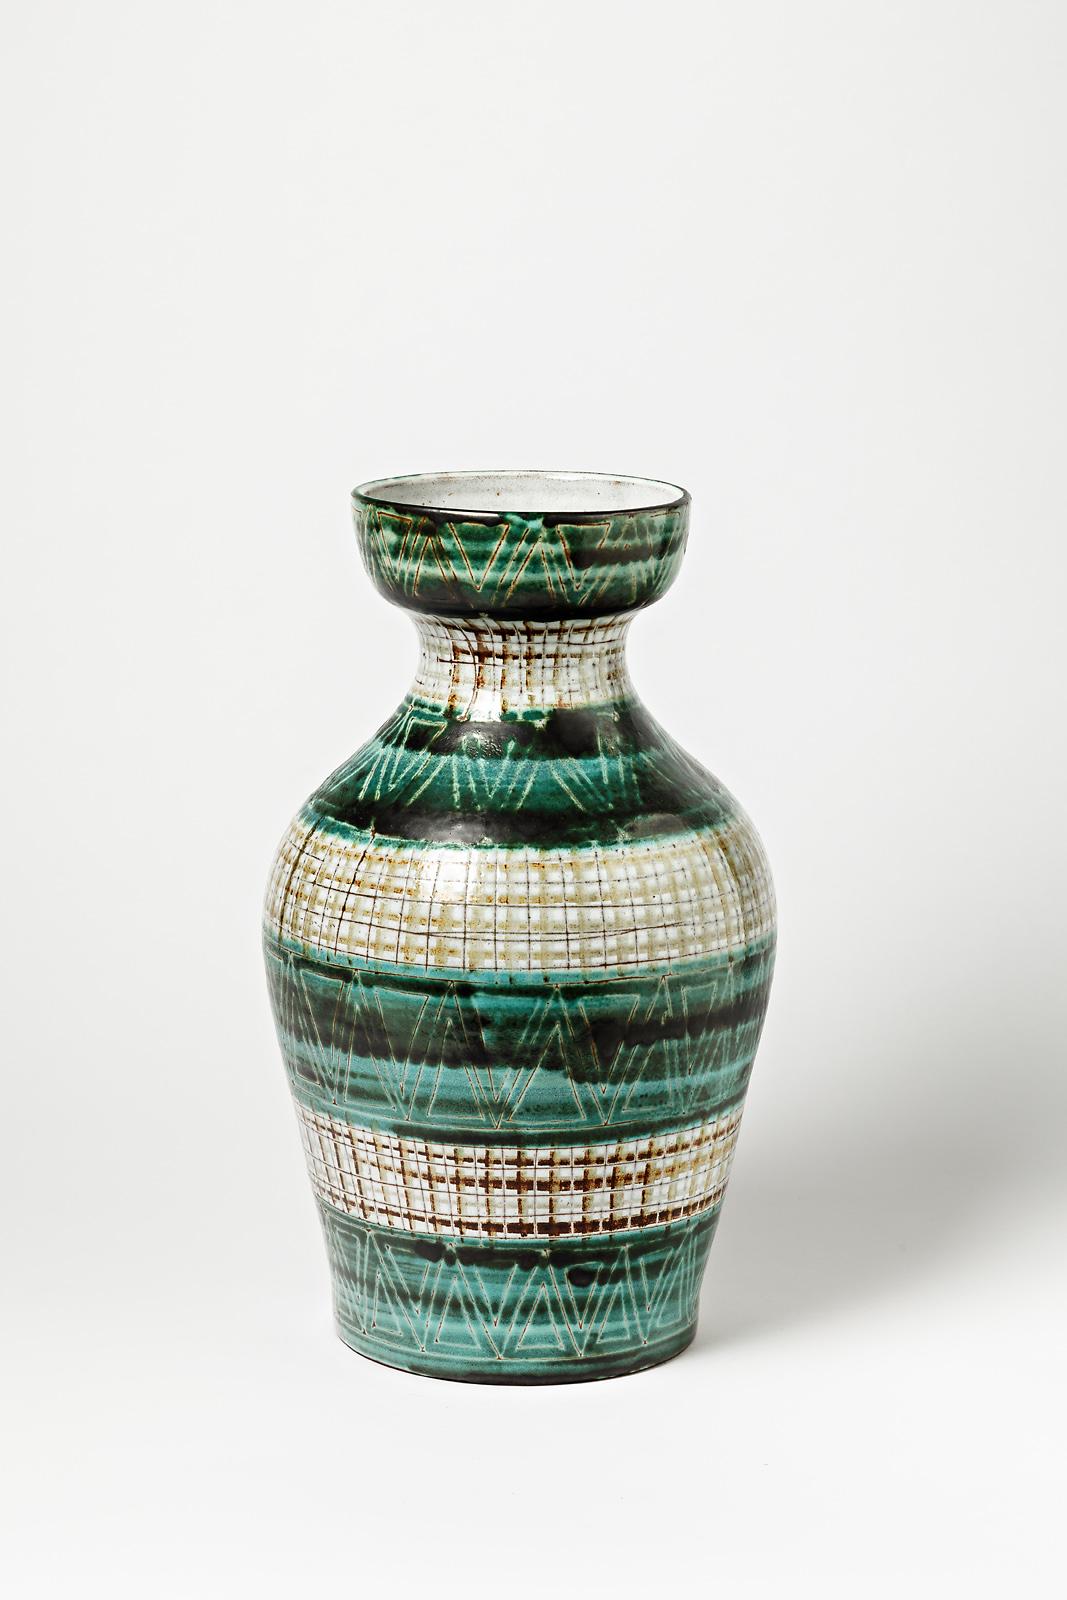 Mid-Century Modern Large Decorative Green and White Ceramic Vase by Picault Vallauris, 1950